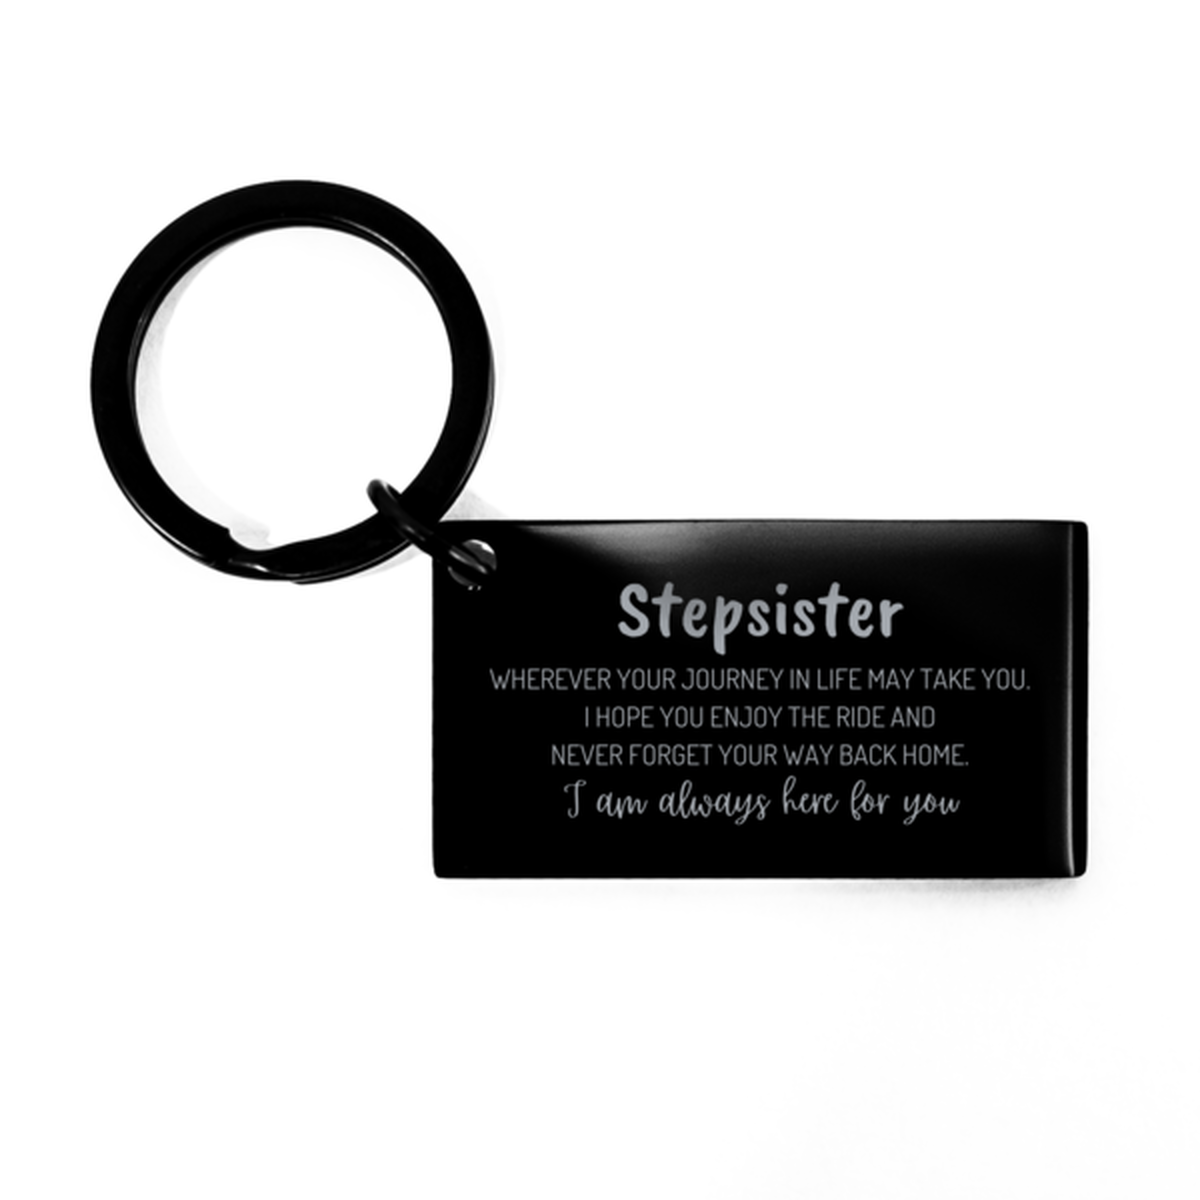 Stepsister wherever your journey in life may take you, I am always here for you Stepsister Keychain, Awesome Christmas Gifts For Stepsister, Stepsister Birthday Gifts for Men Women Family Loved One